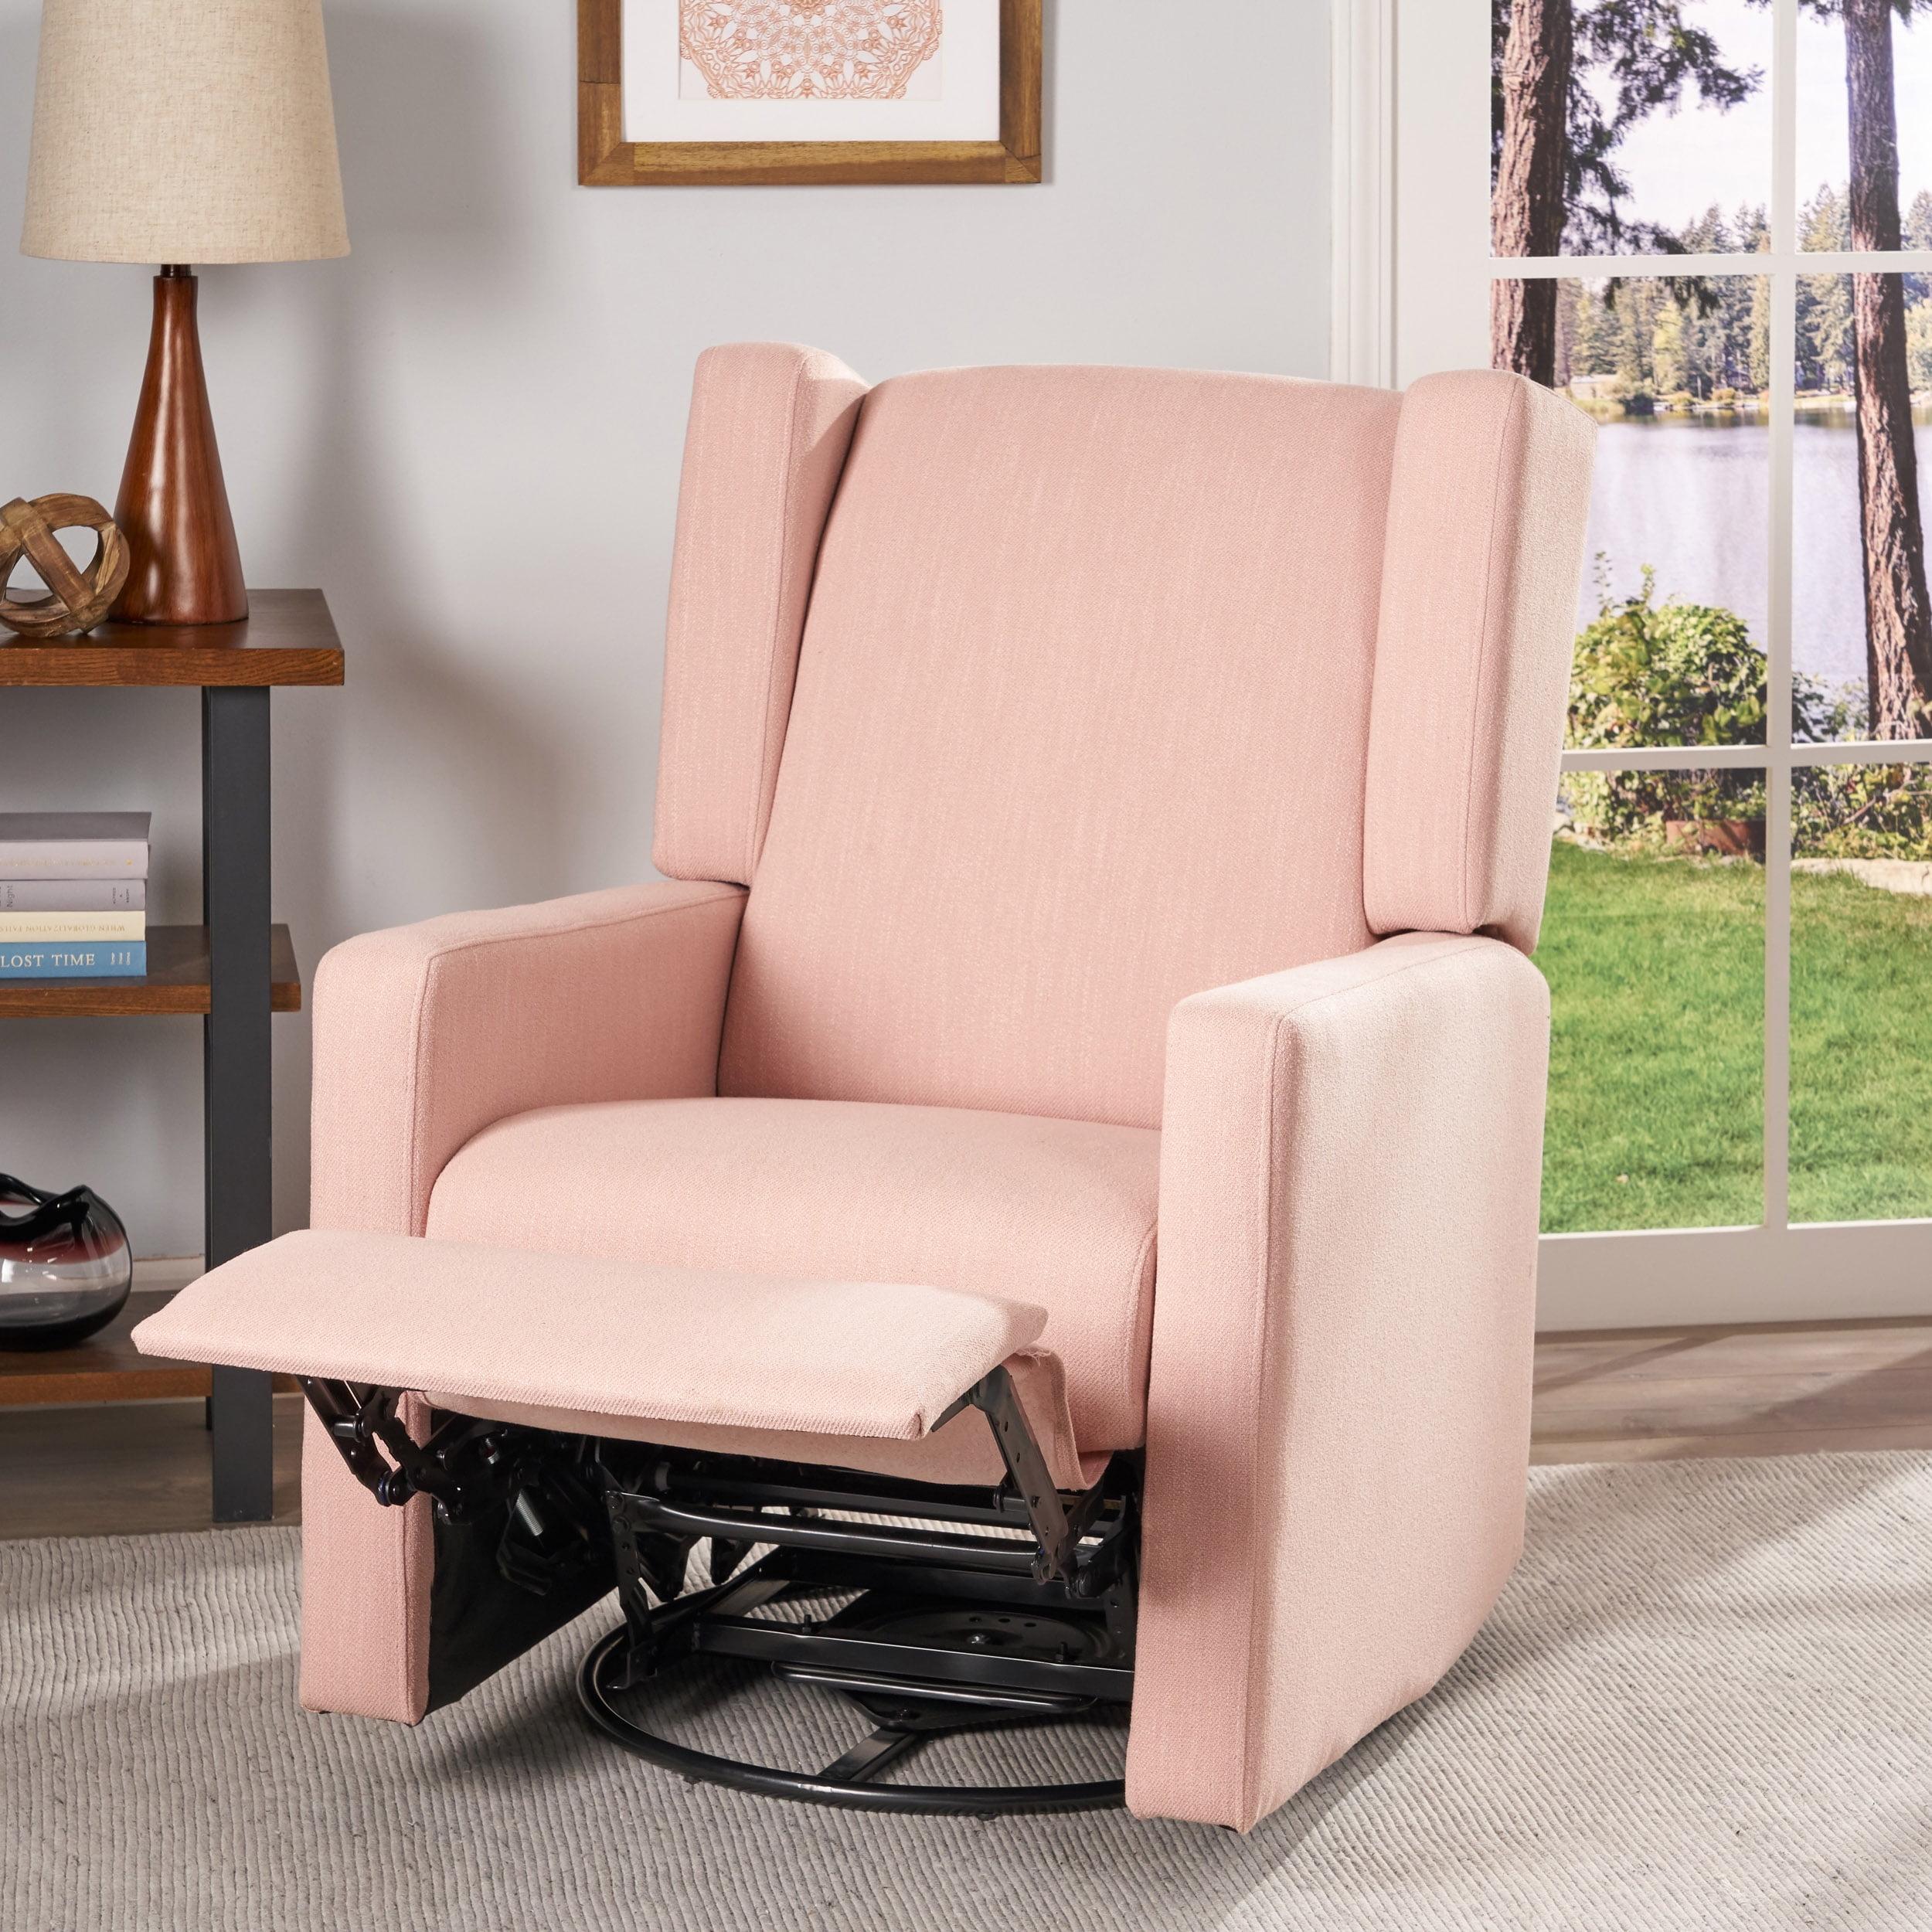 Blush and Black Fabric Swivel Recliner with Metal Frame